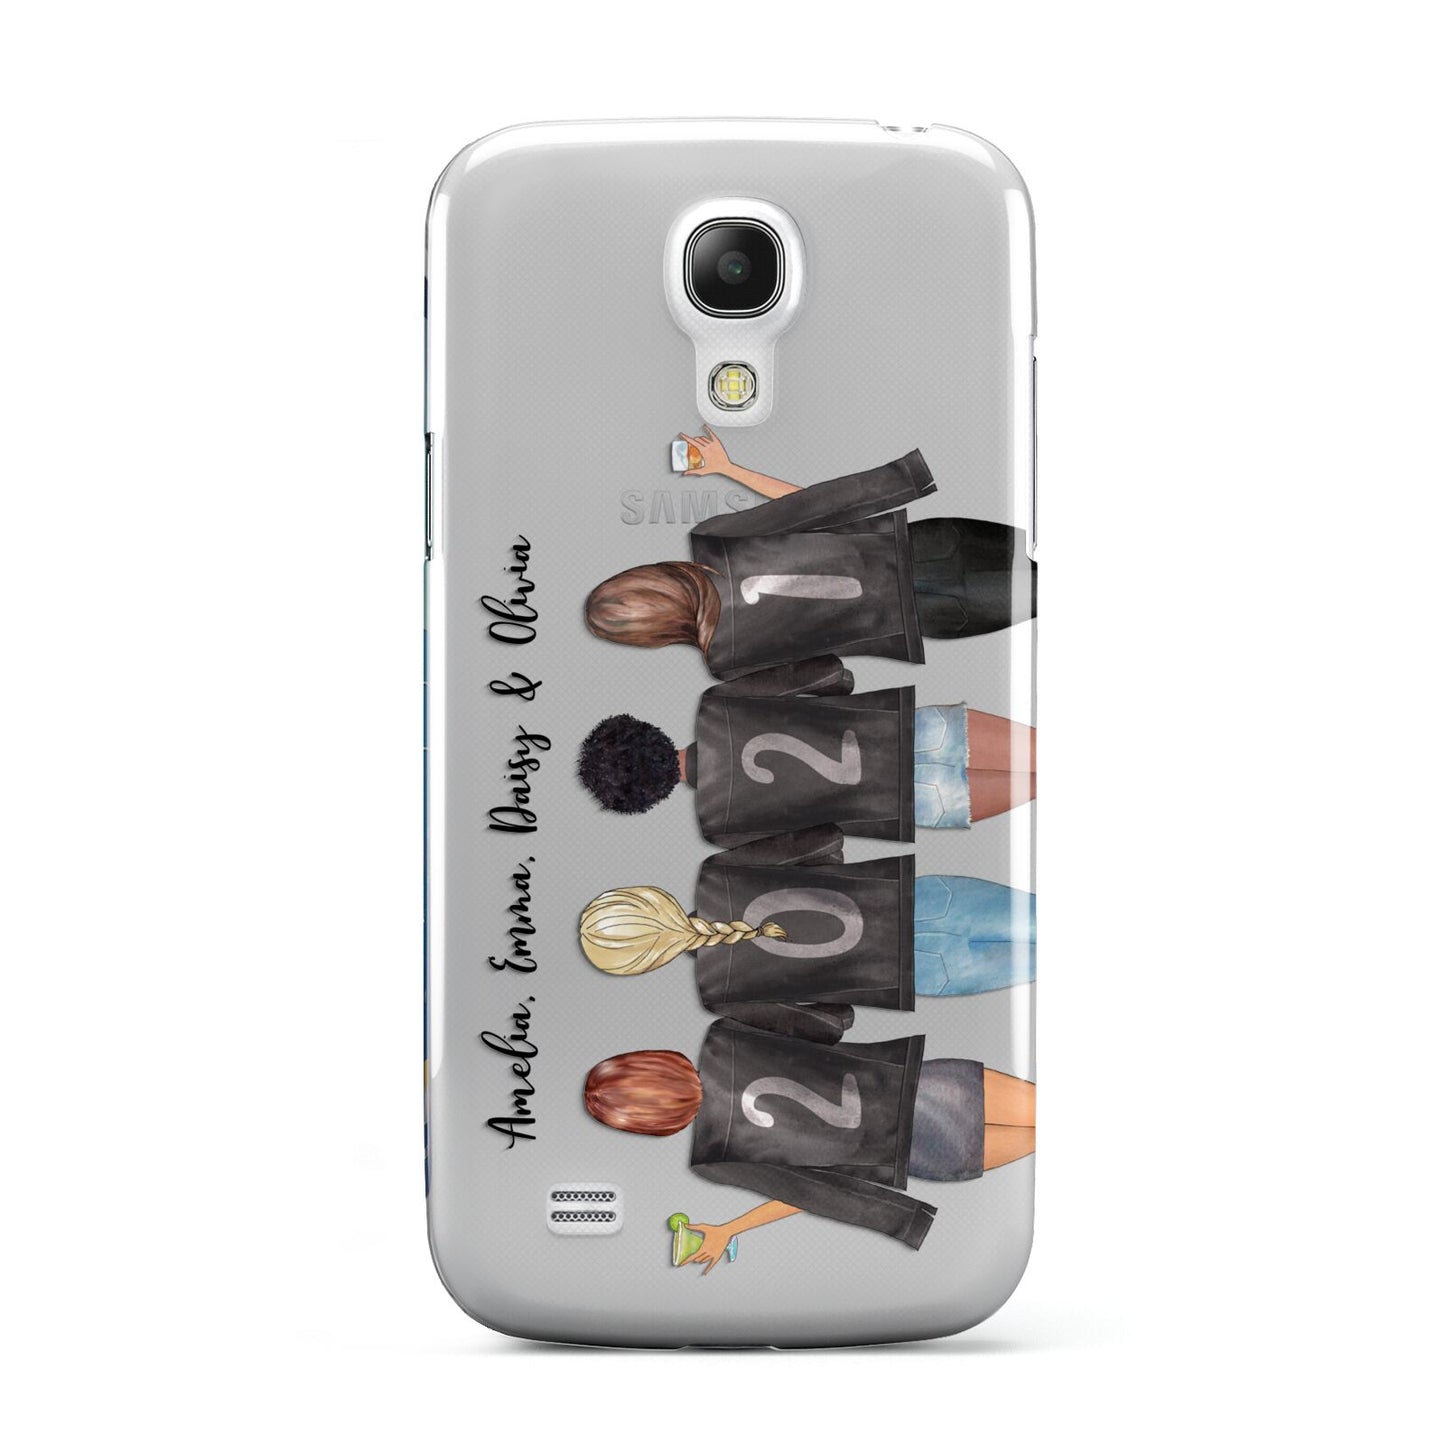 4 Best Friends with Names Samsung Galaxy S4 Mini Case